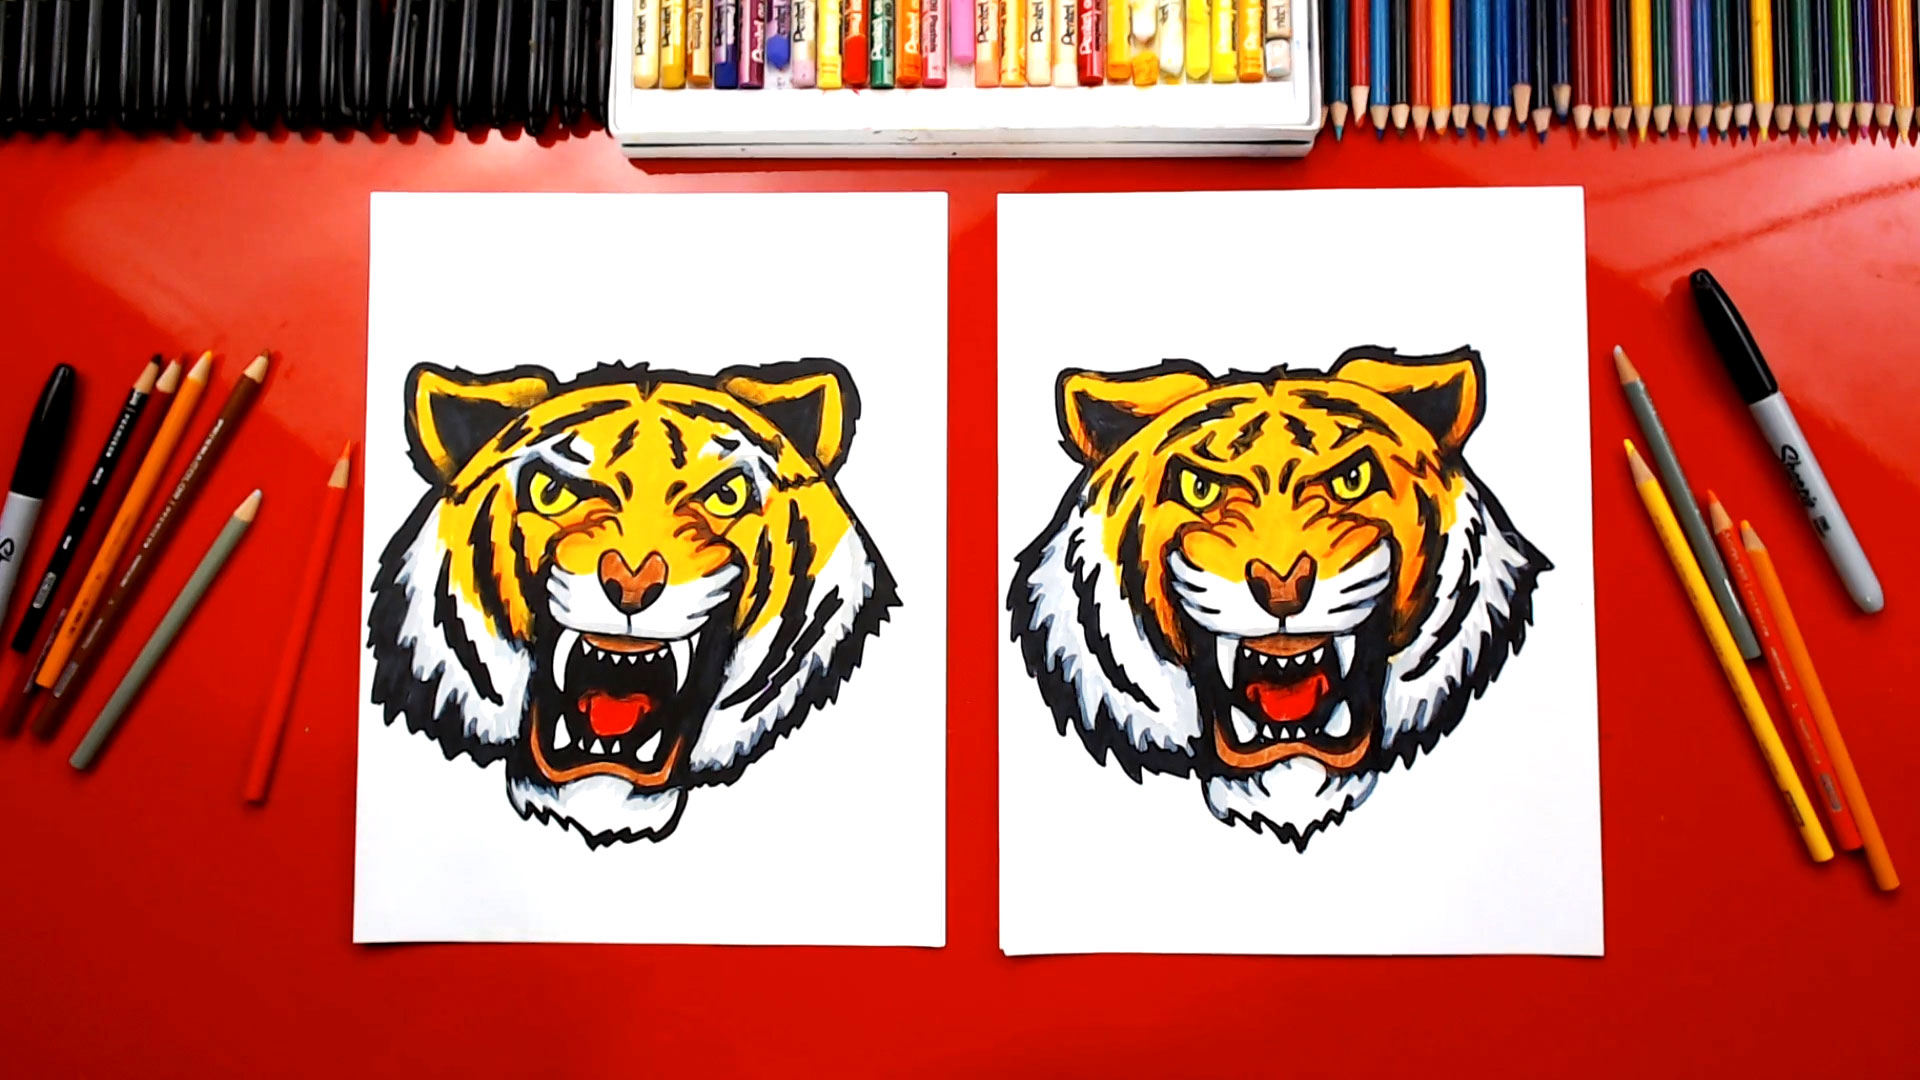 how to draw a tiger for kids